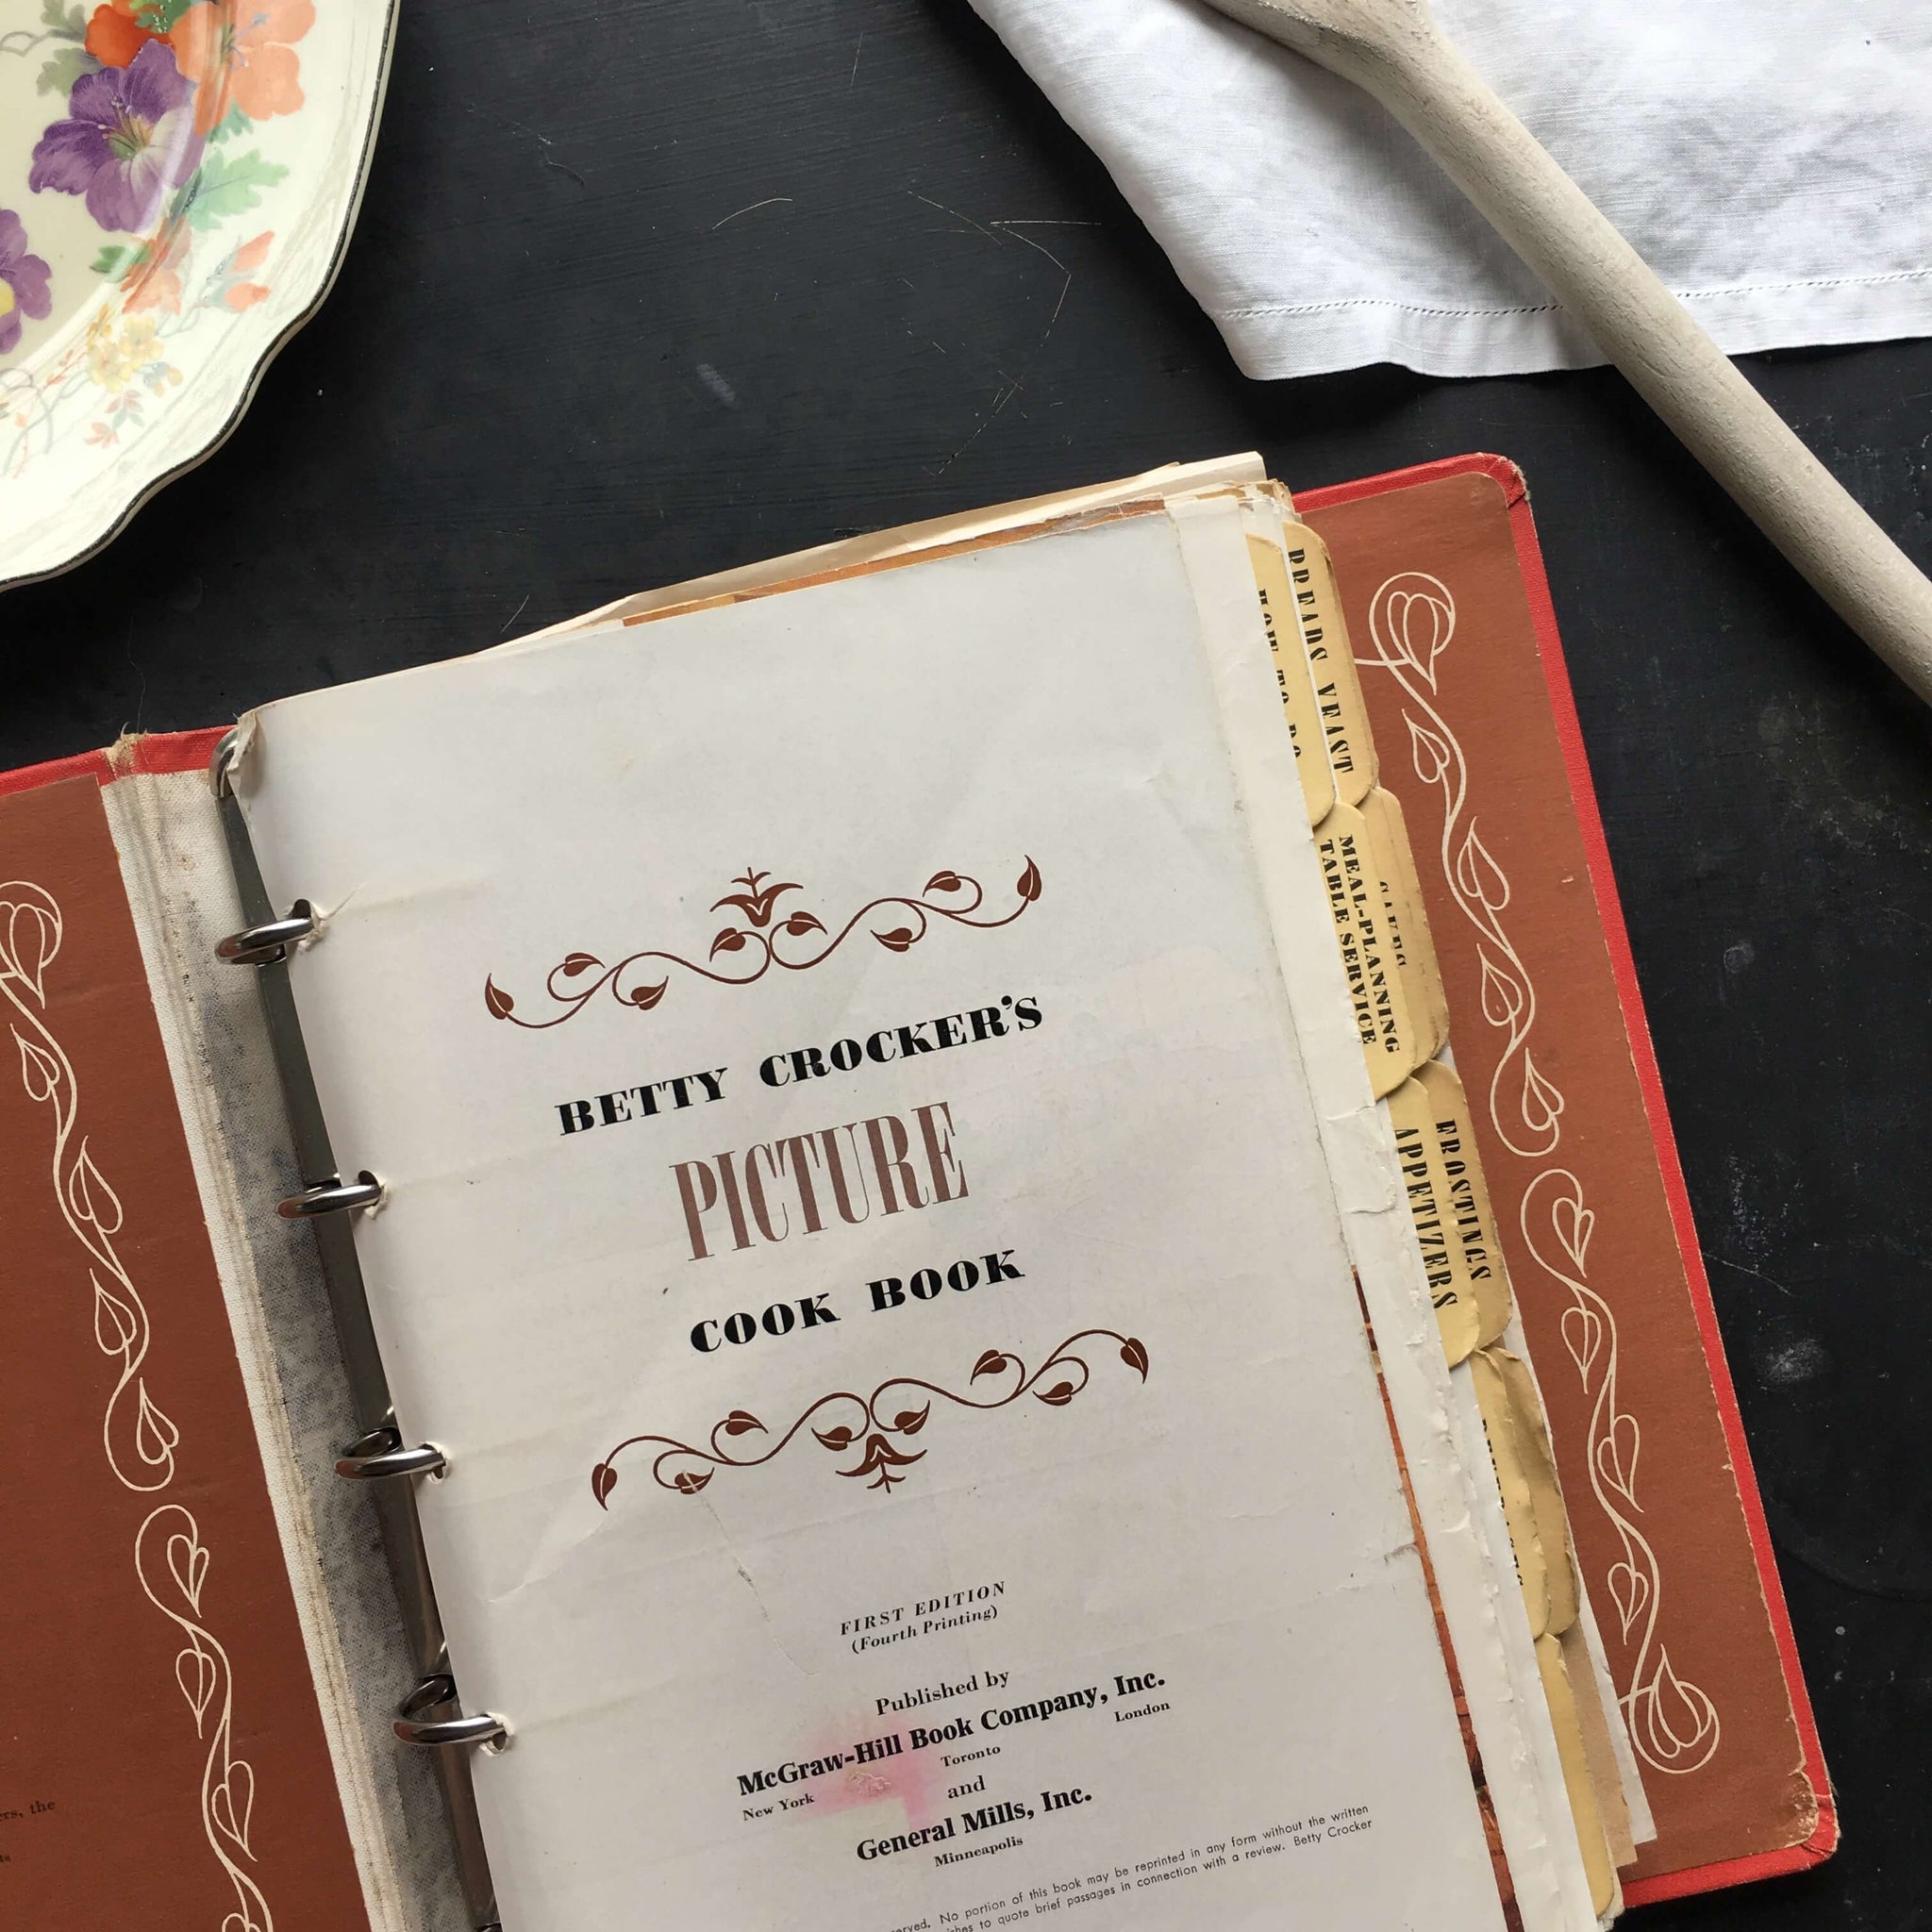 Betty Crocker's Picture Cook Book - 1950 First Edition Fourth Printing with Additional Clipped & Handwritten Recipes